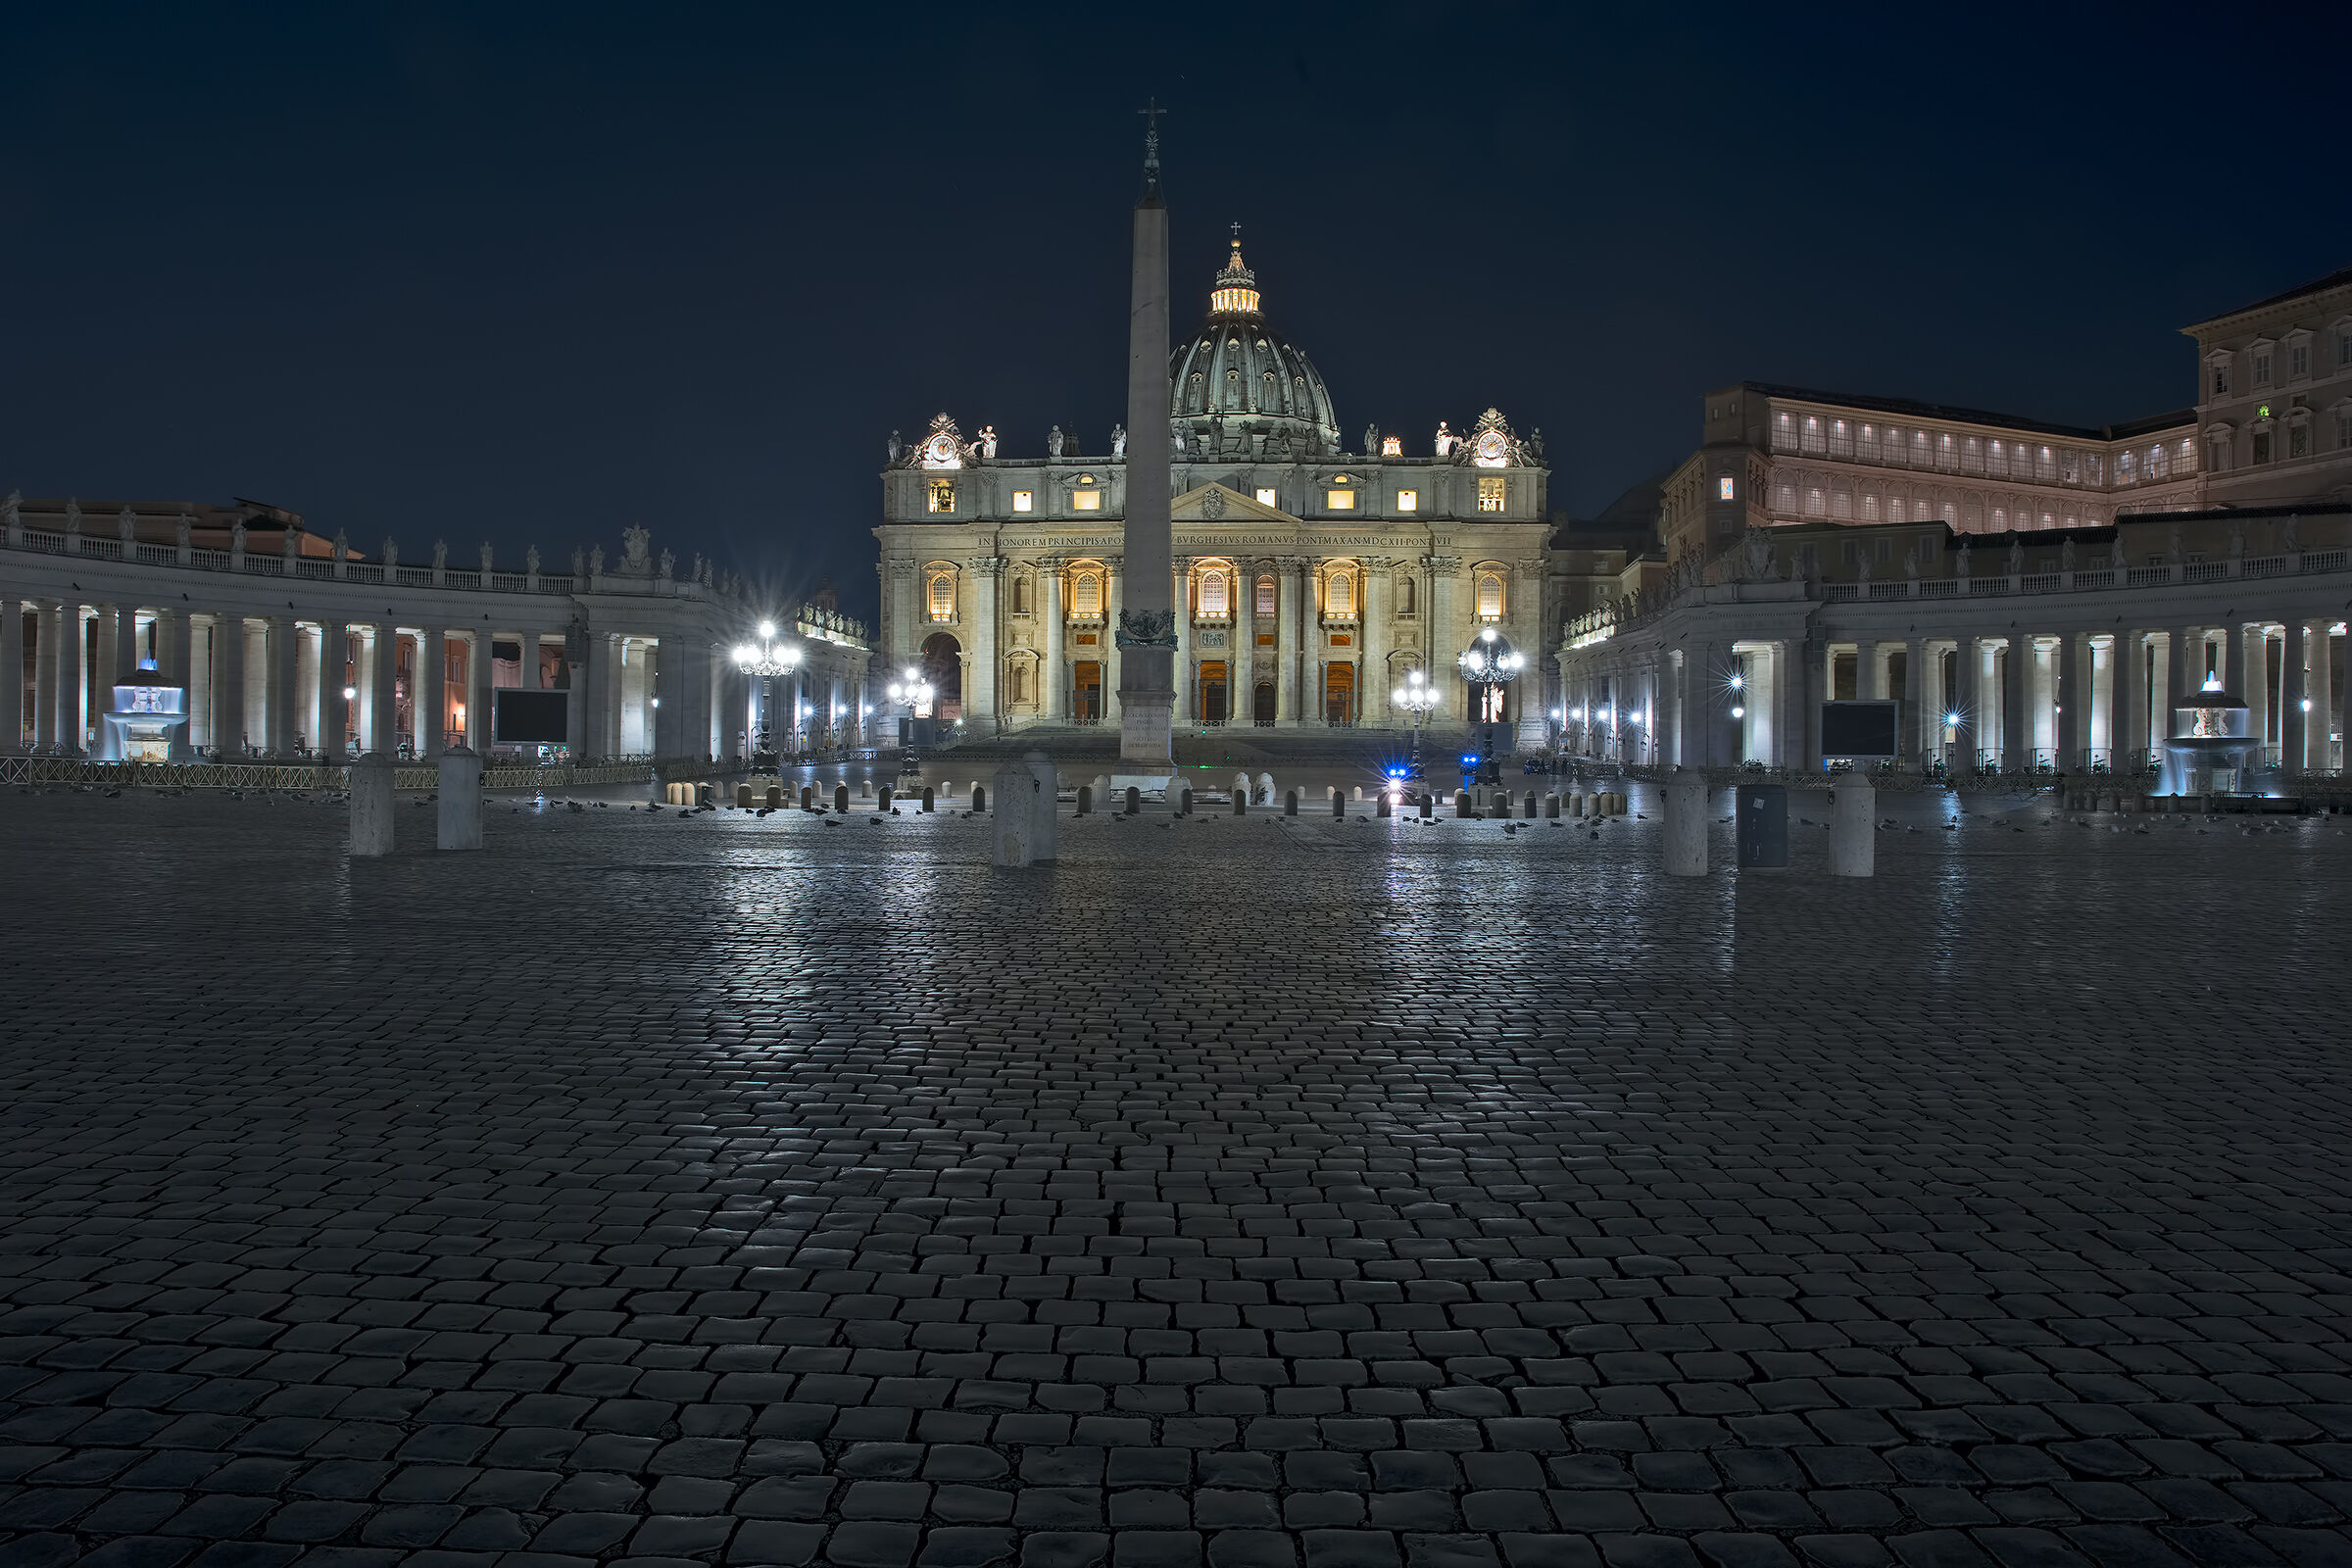 St. Peter's Square...